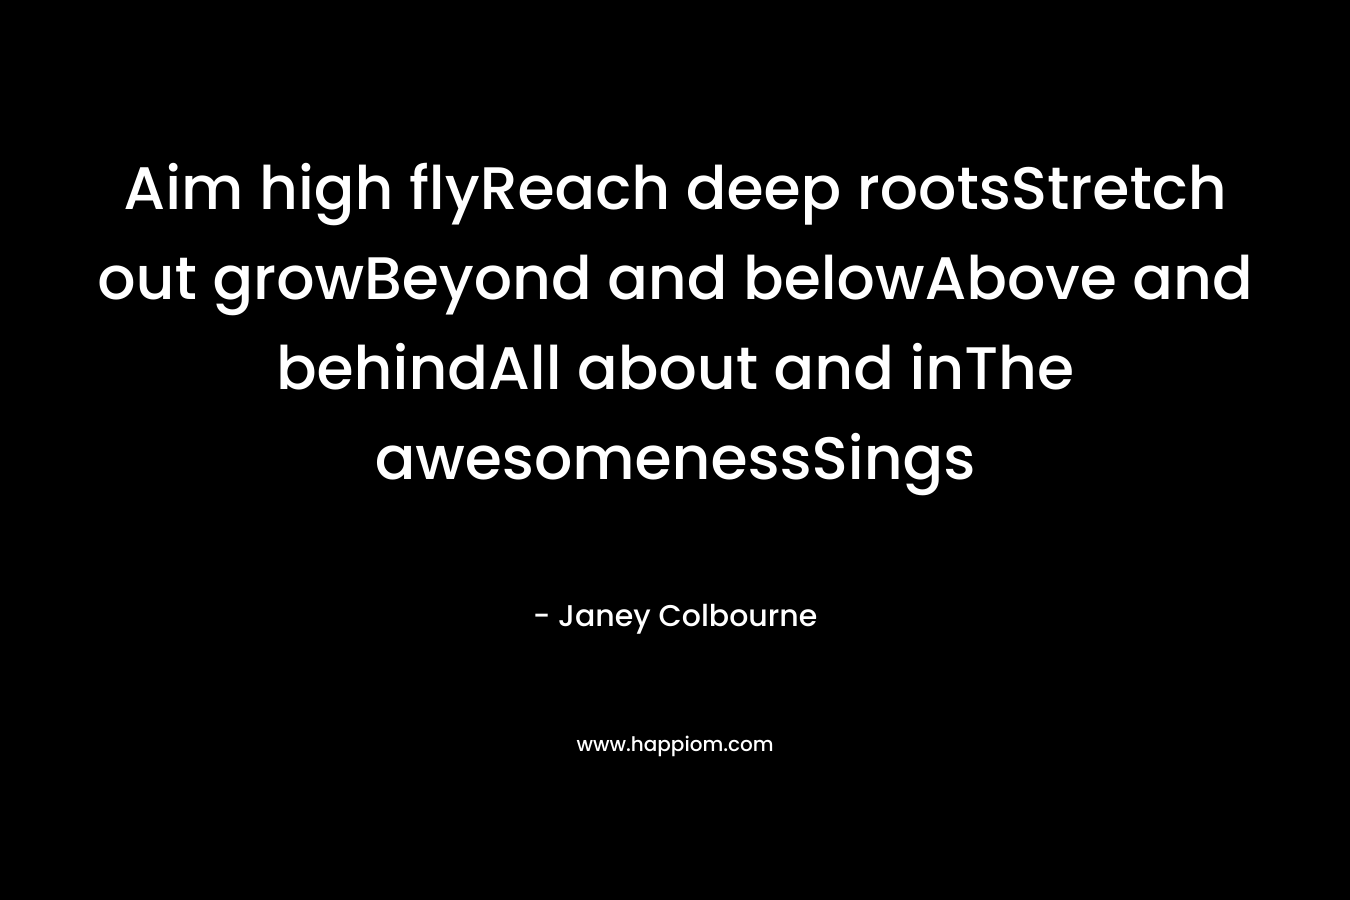 Aim high flyReach deep rootsStretch out growBeyond and belowAbove and behindAll about and inThe awesomenessSings